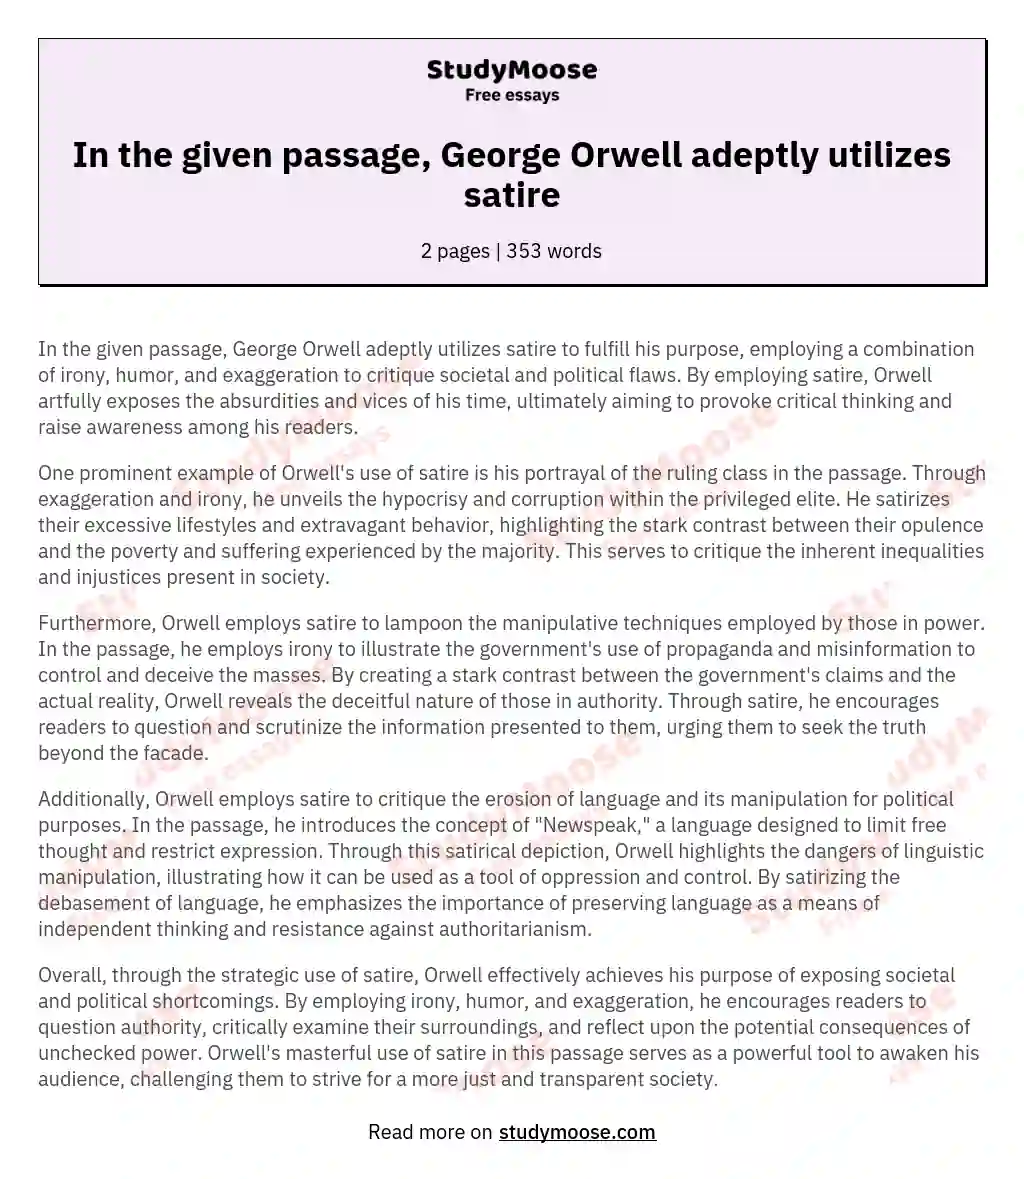 In the given passage, George Orwell adeptly utilizes satire essay